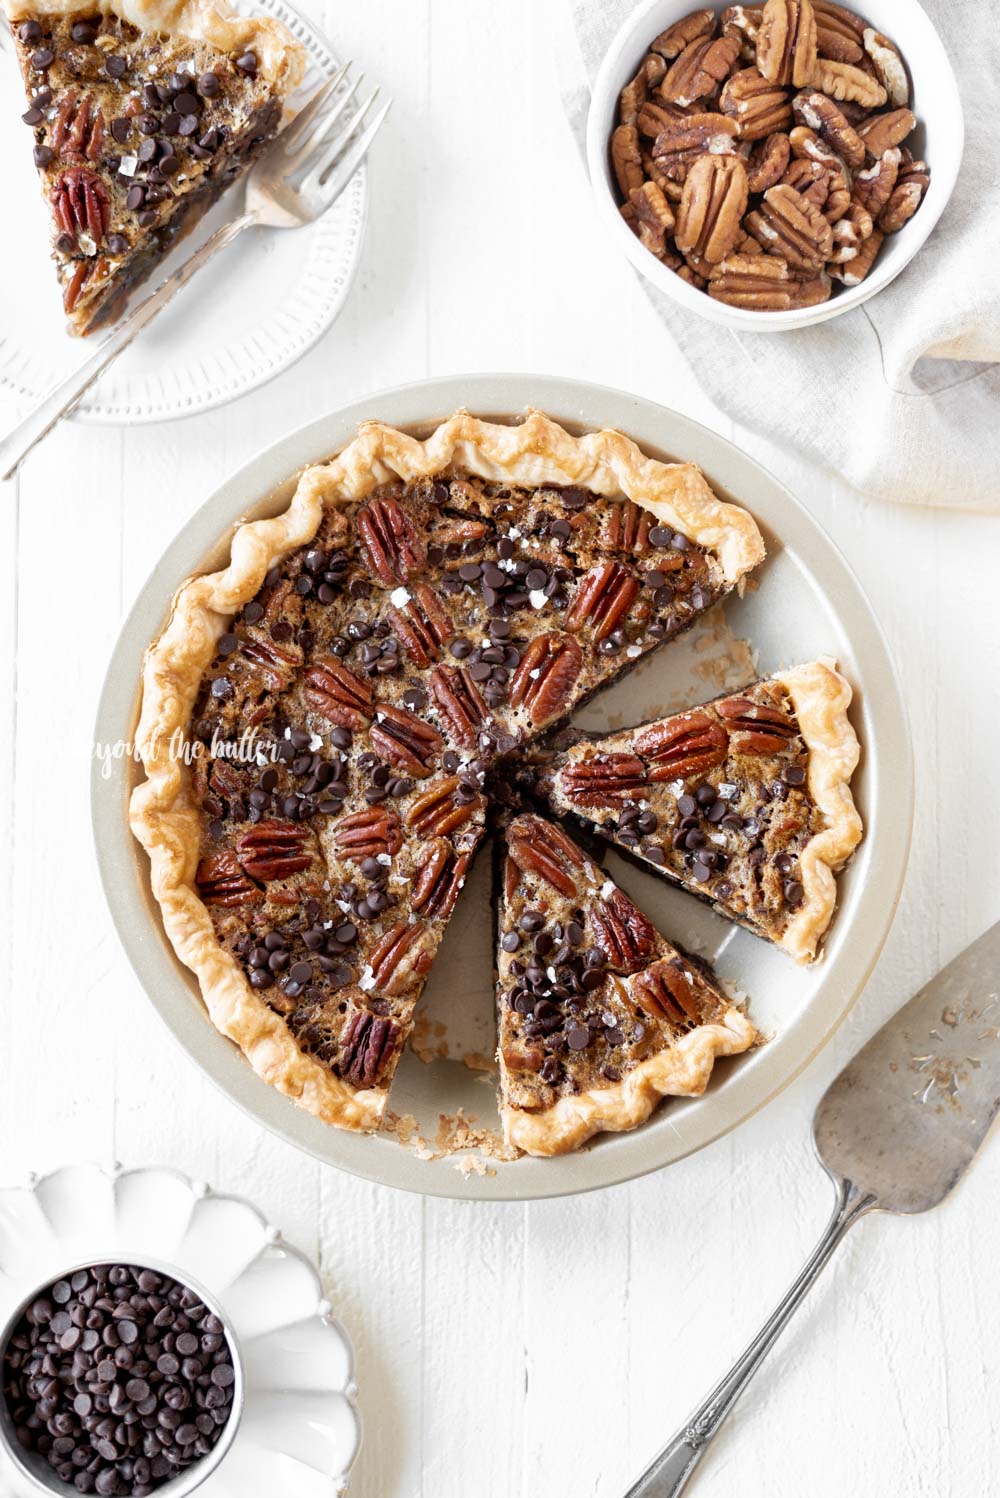 Easy Chocolate Pecan Pie | All Images © Beyond the Butter, LLC